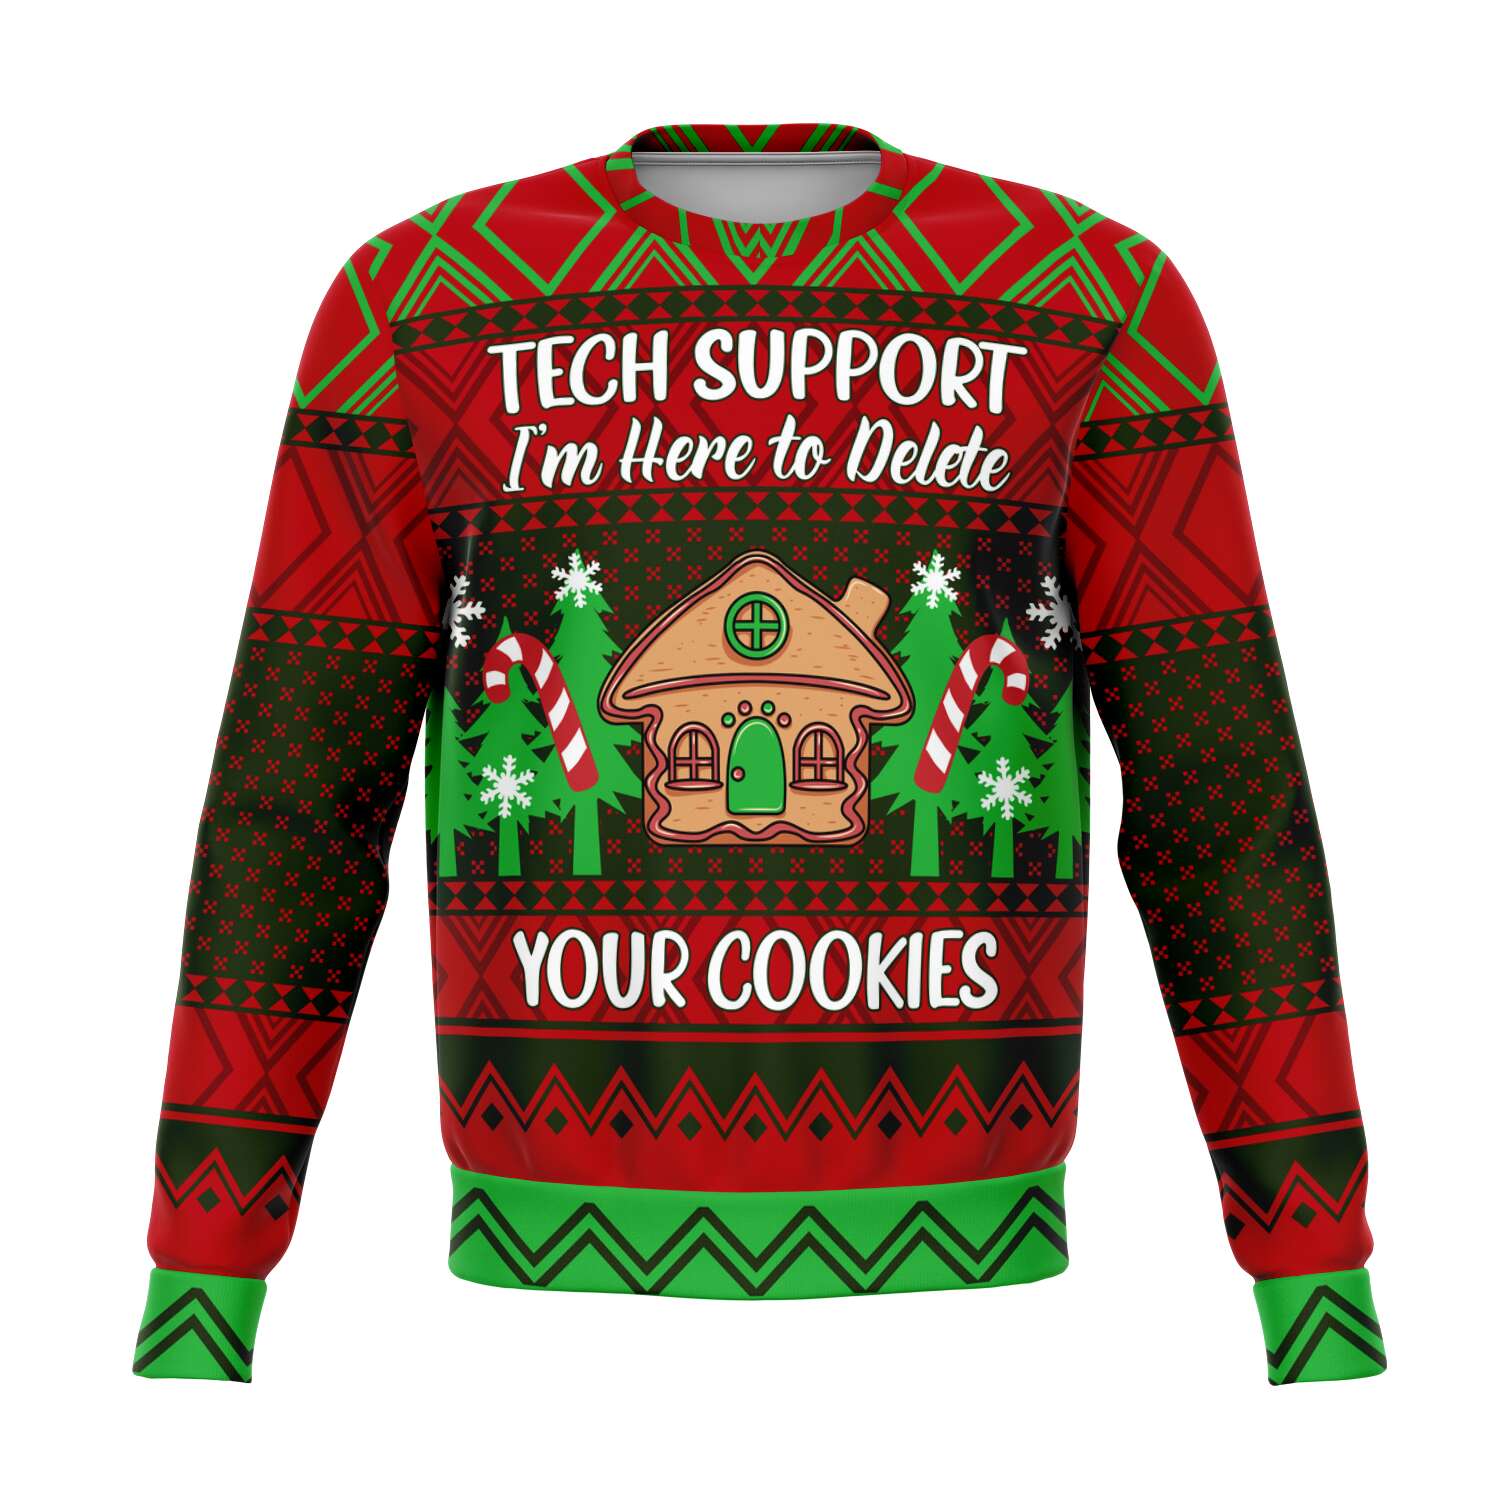 Im Here To Delete Your Cookies  Sweatshirt | Unisex Ugly Christmas Sweater, Xmas Sweater, Holiday Sweater, Festive Sweater, Funny Sweater, Funny Party Shirt